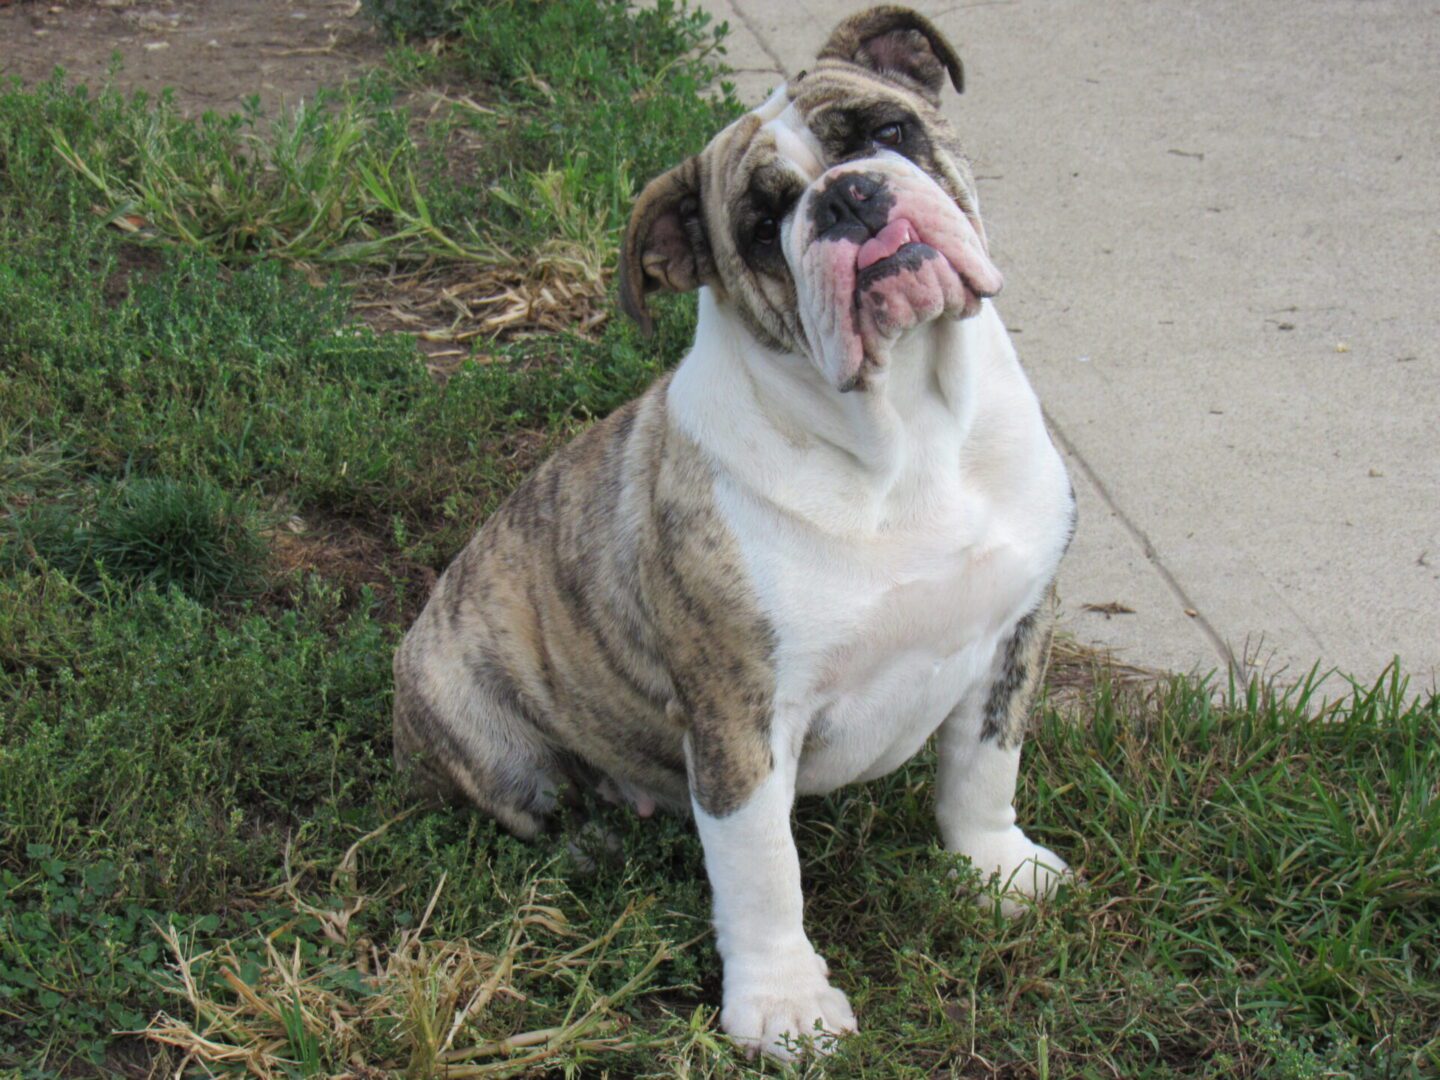 A White and Brown Bull Dog Sitting on a Lawn